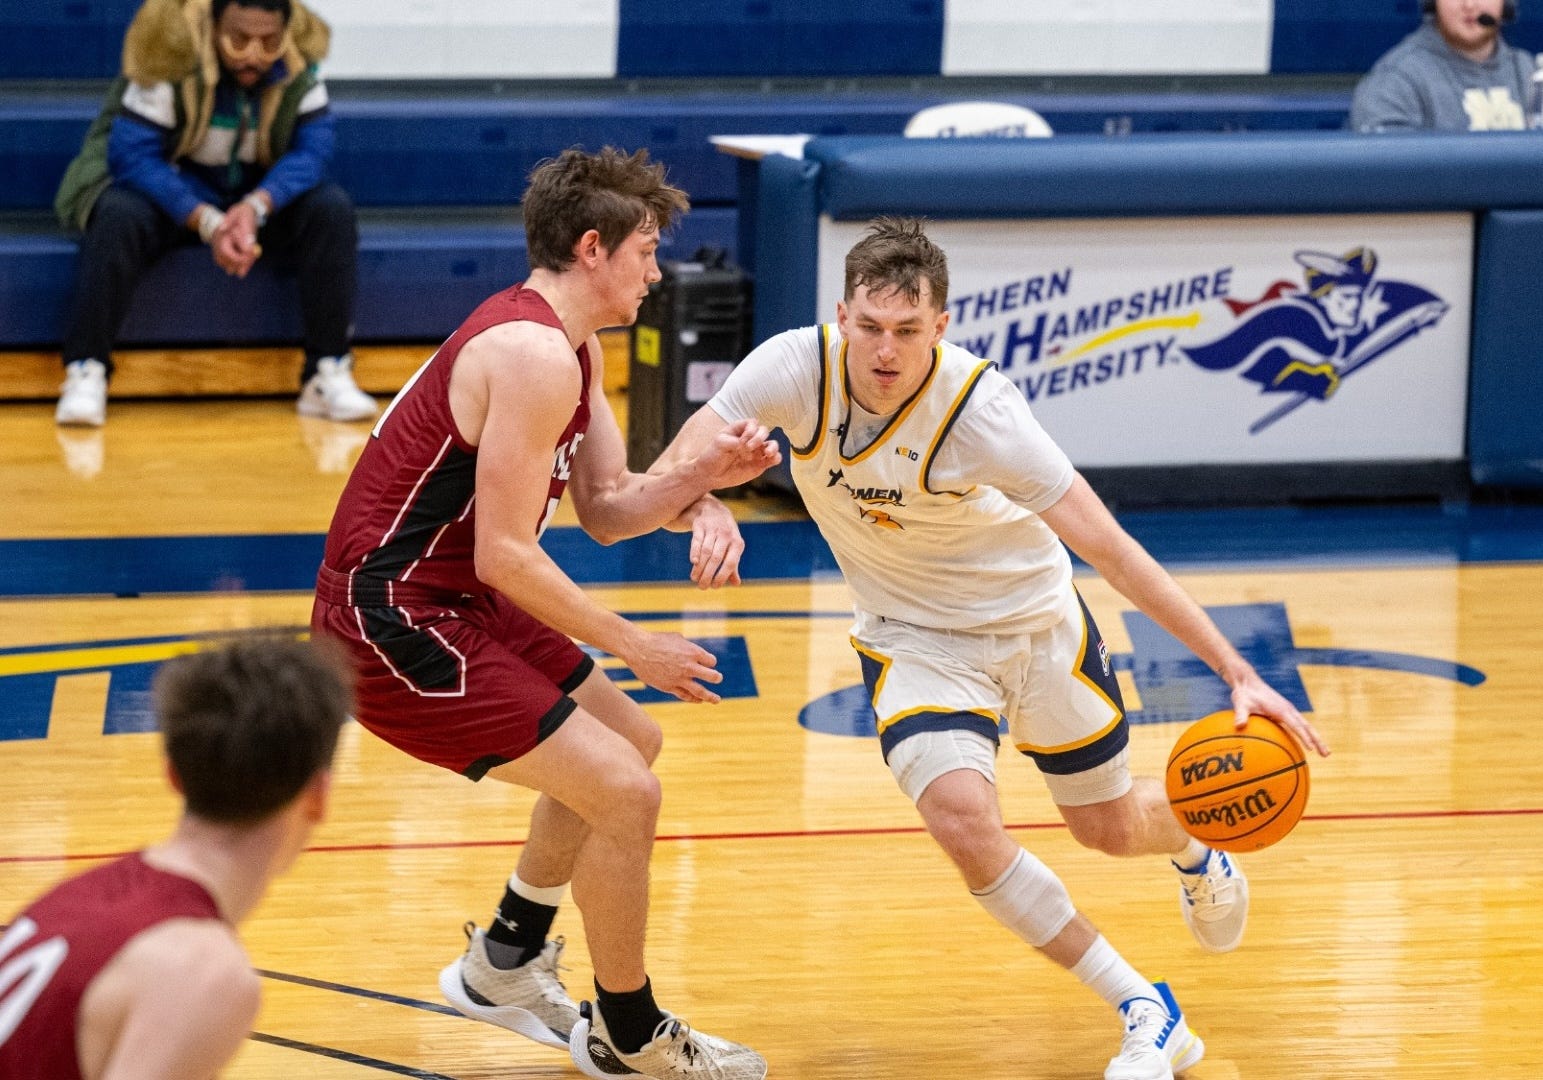 Merrimack adds to its backcourt with a transfer commitment from Matt Becht